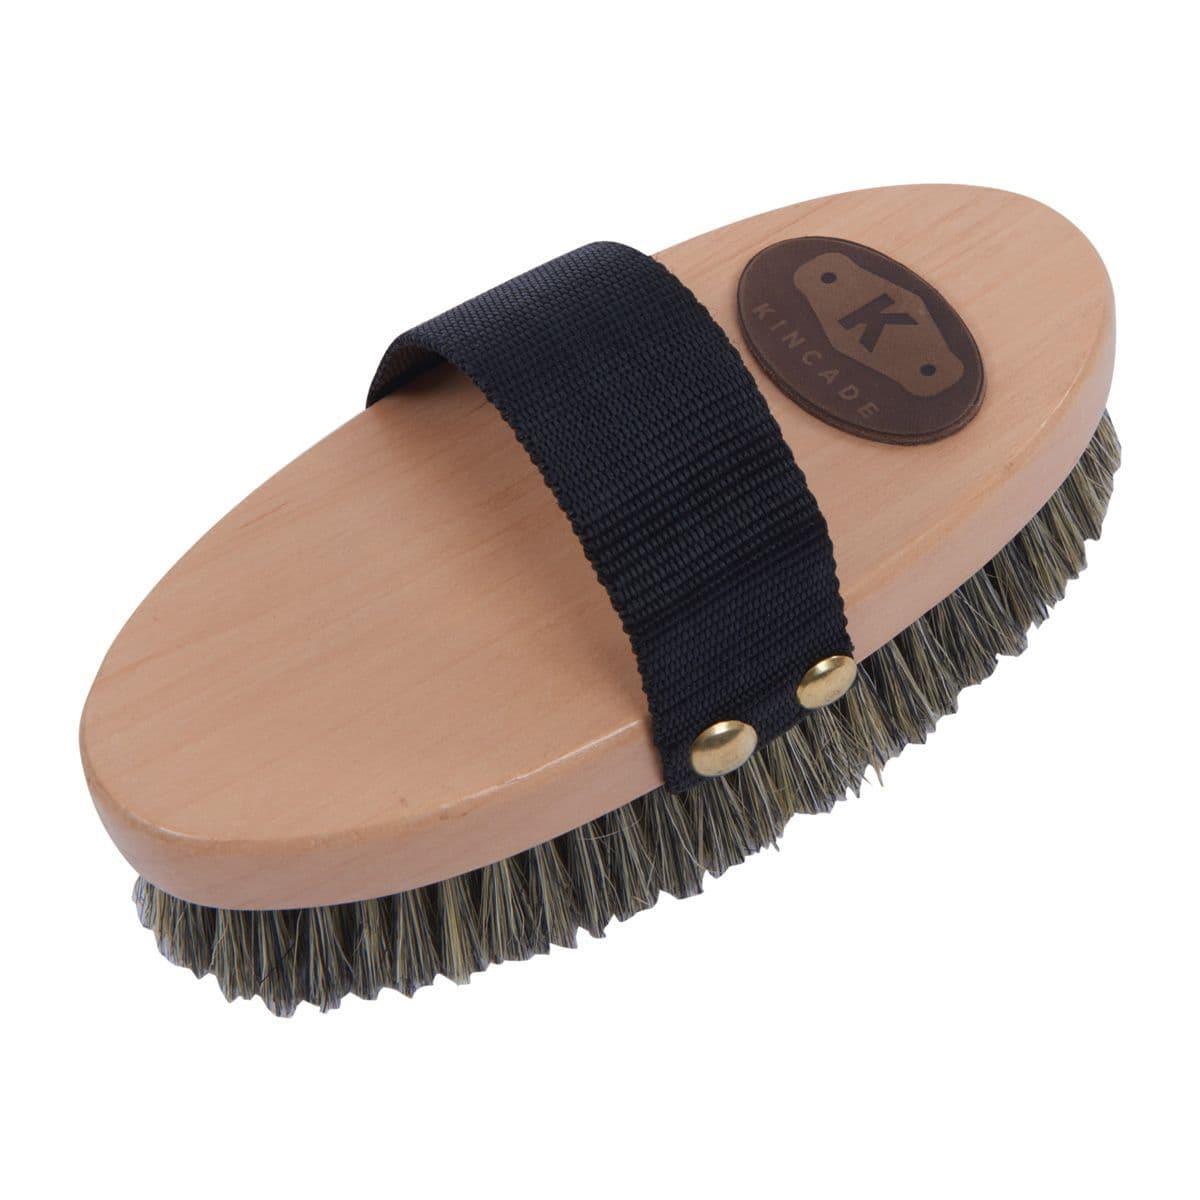 Kincade Wooden Deluxe Body Brush - Just Horse Riders